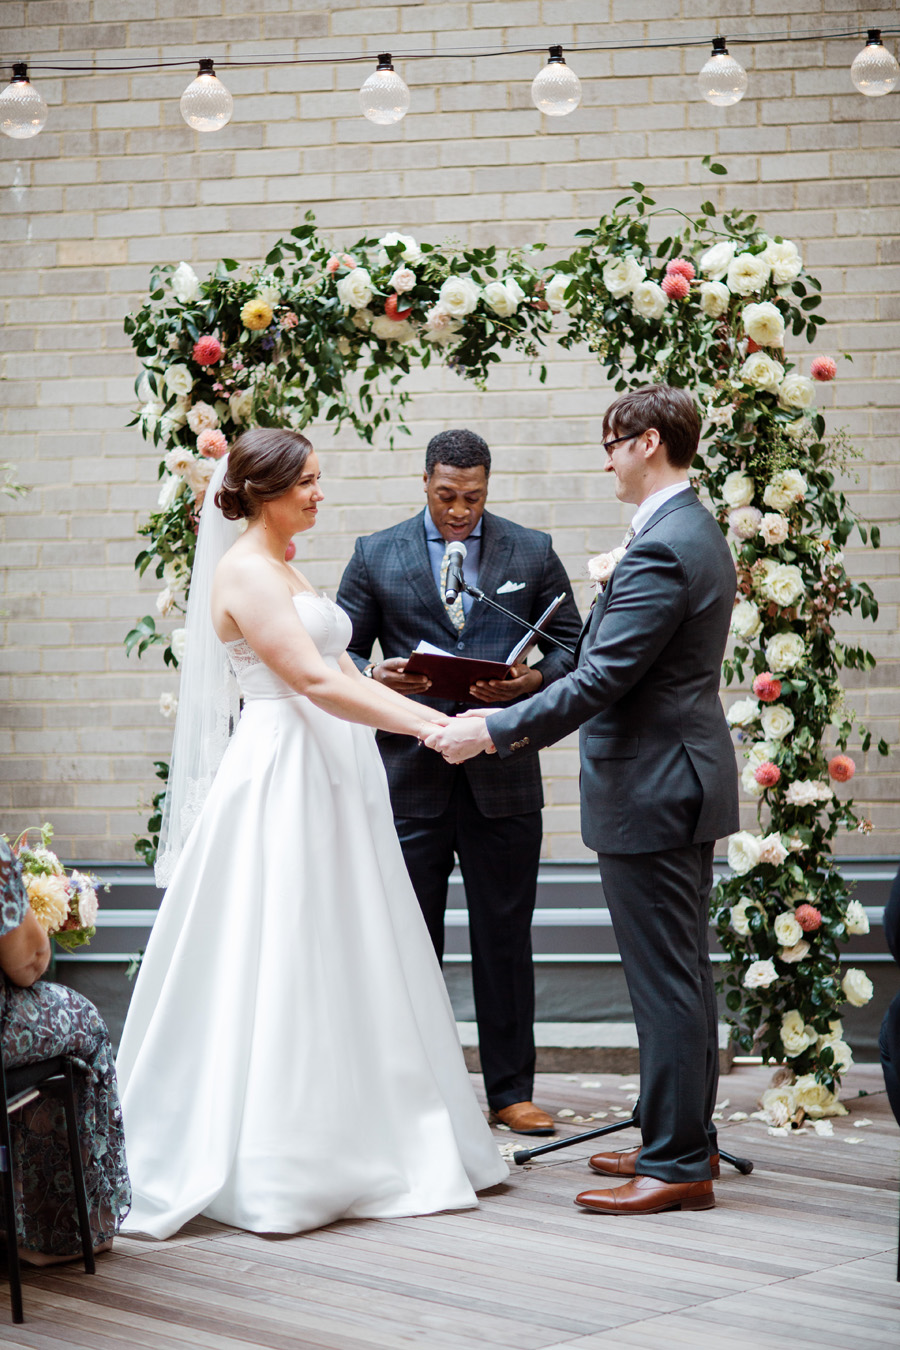 Intimate Wedding at Yours Truly Hotel Washington, DC, Bright Occasions Event Planner, Lisa Hessel Photography,